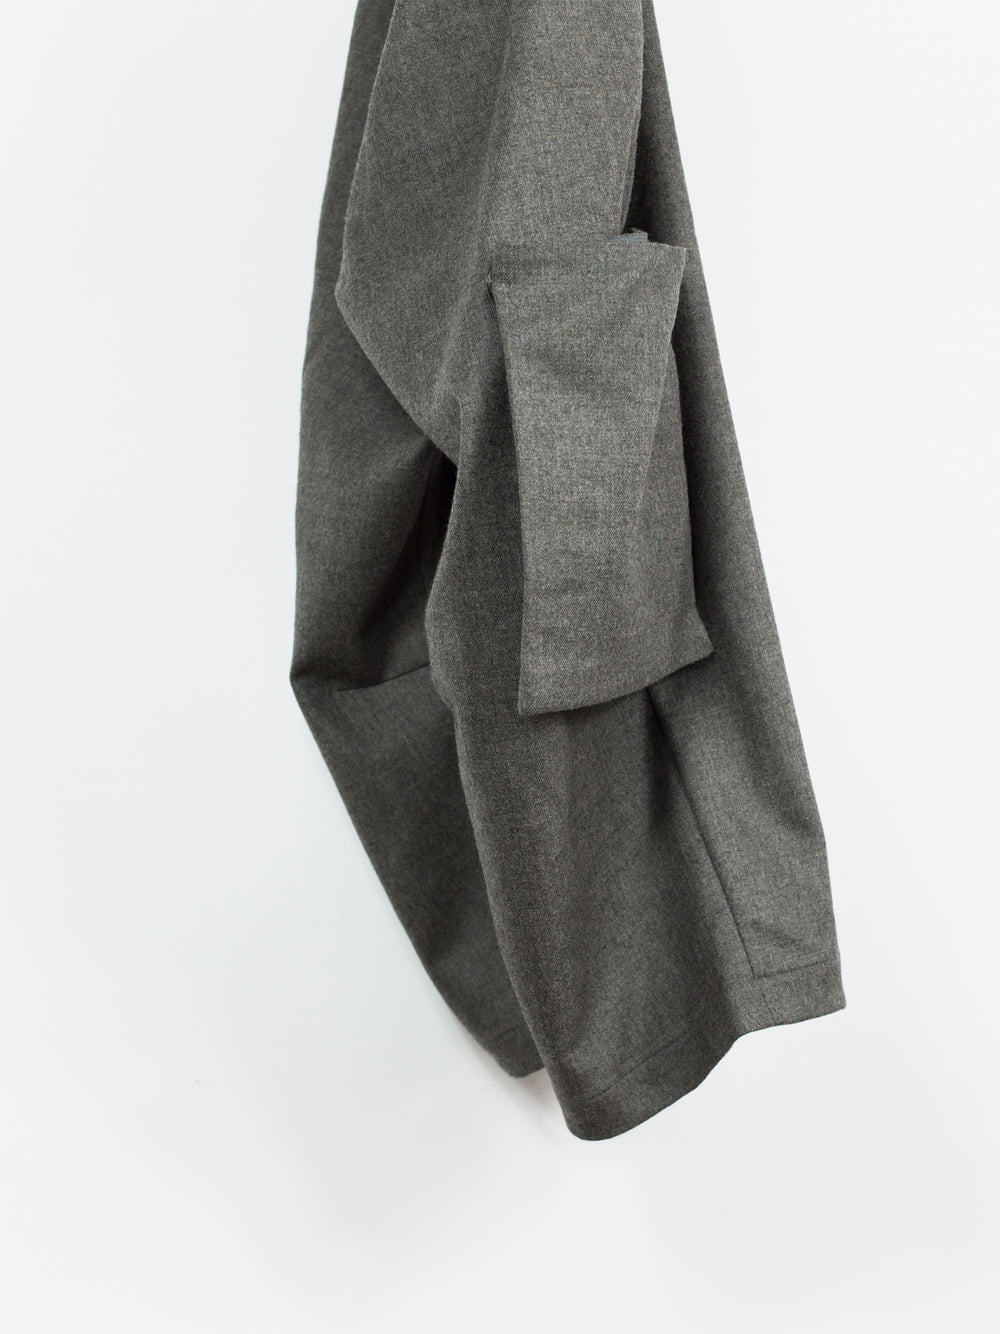 Toogood x A&S Forager Trouser